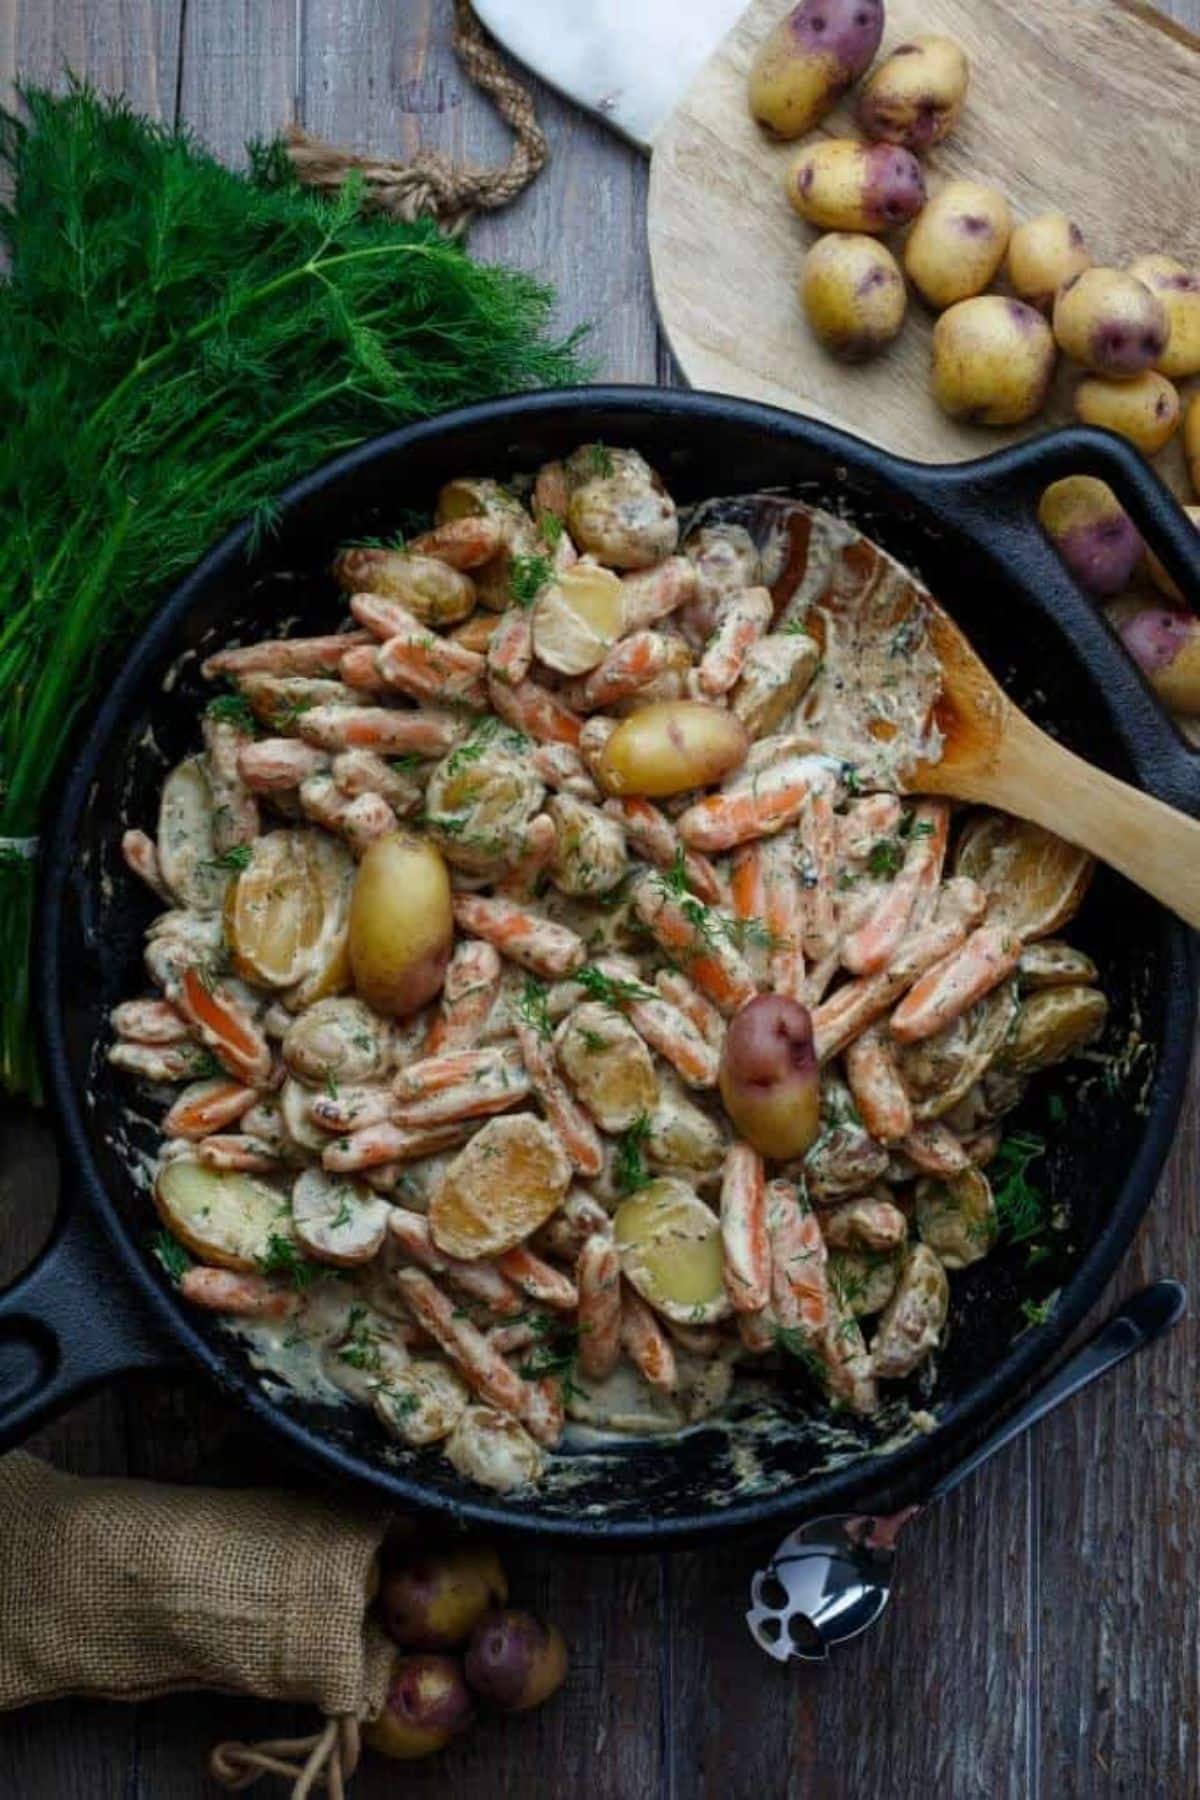 Creamy Sour Cream Lemon Potatoes and Carrots in a black skillet with a wooden spatula.